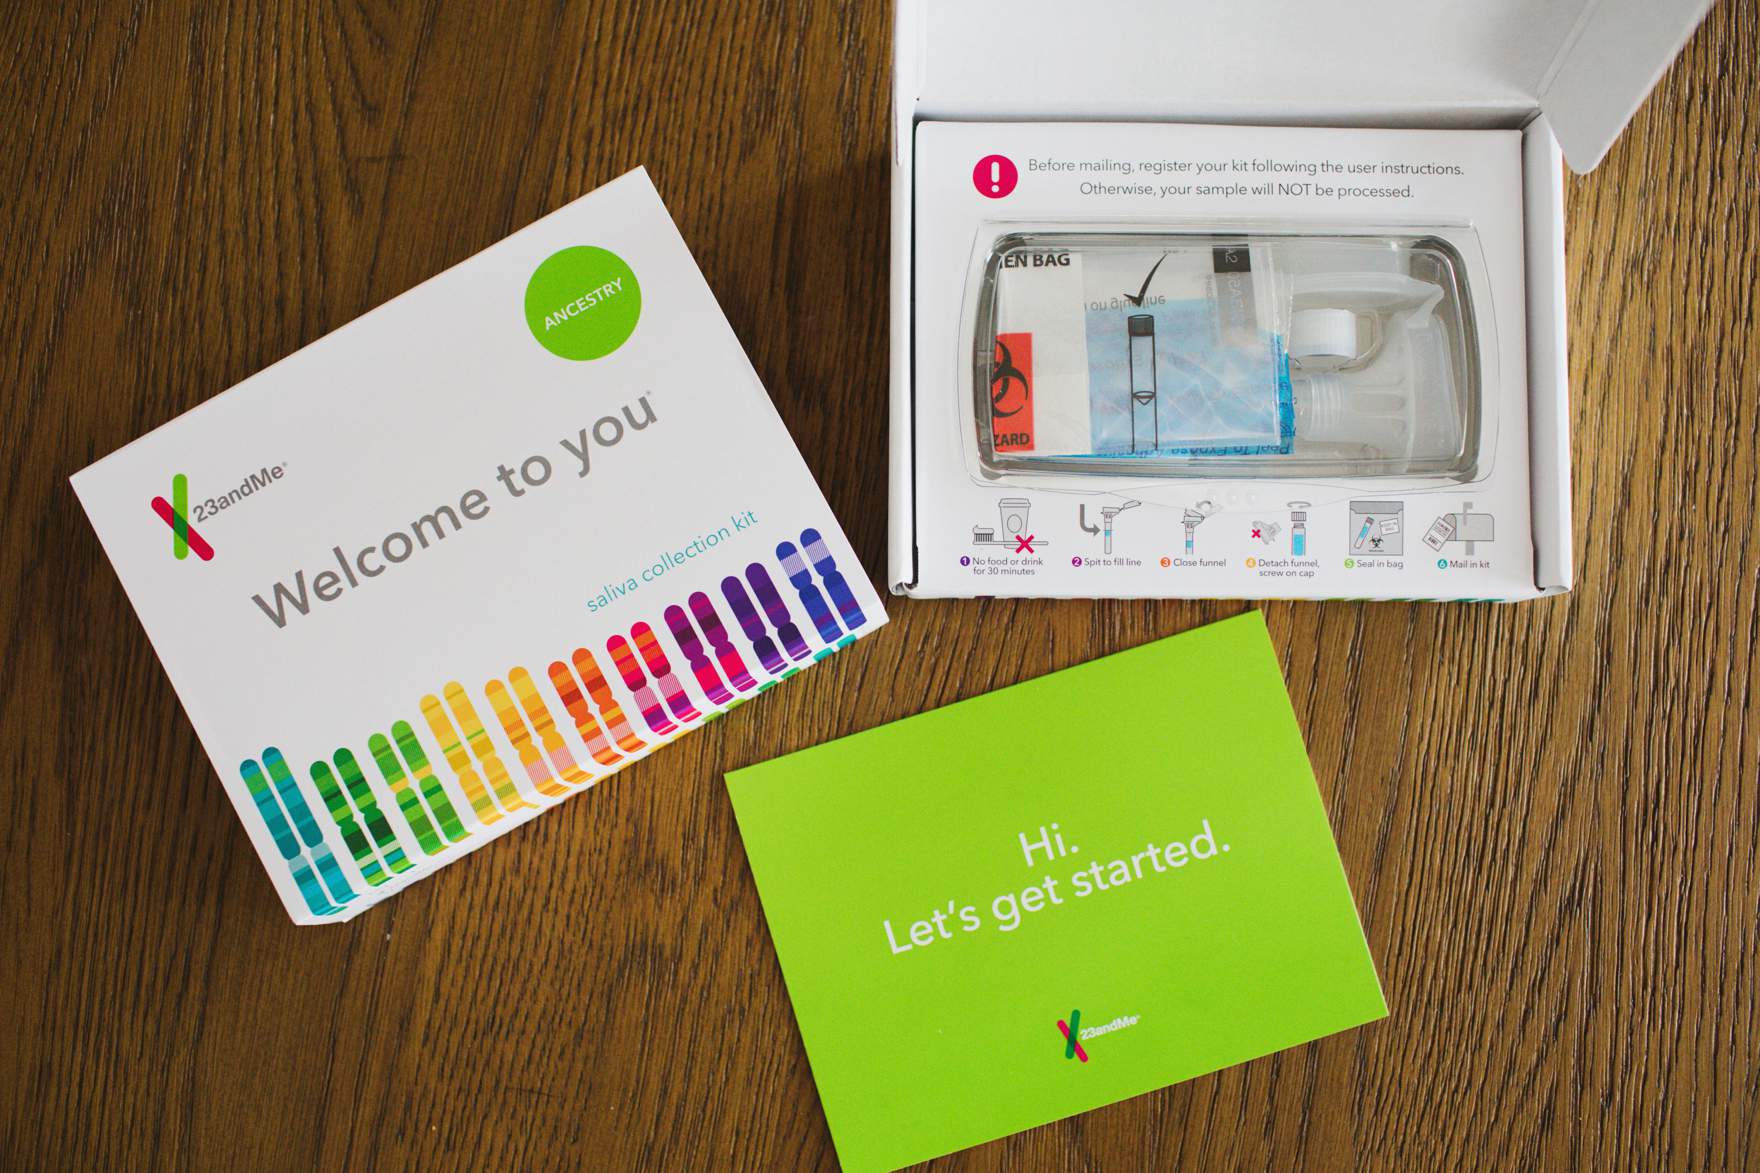 23andMe gift idea kit what is inside